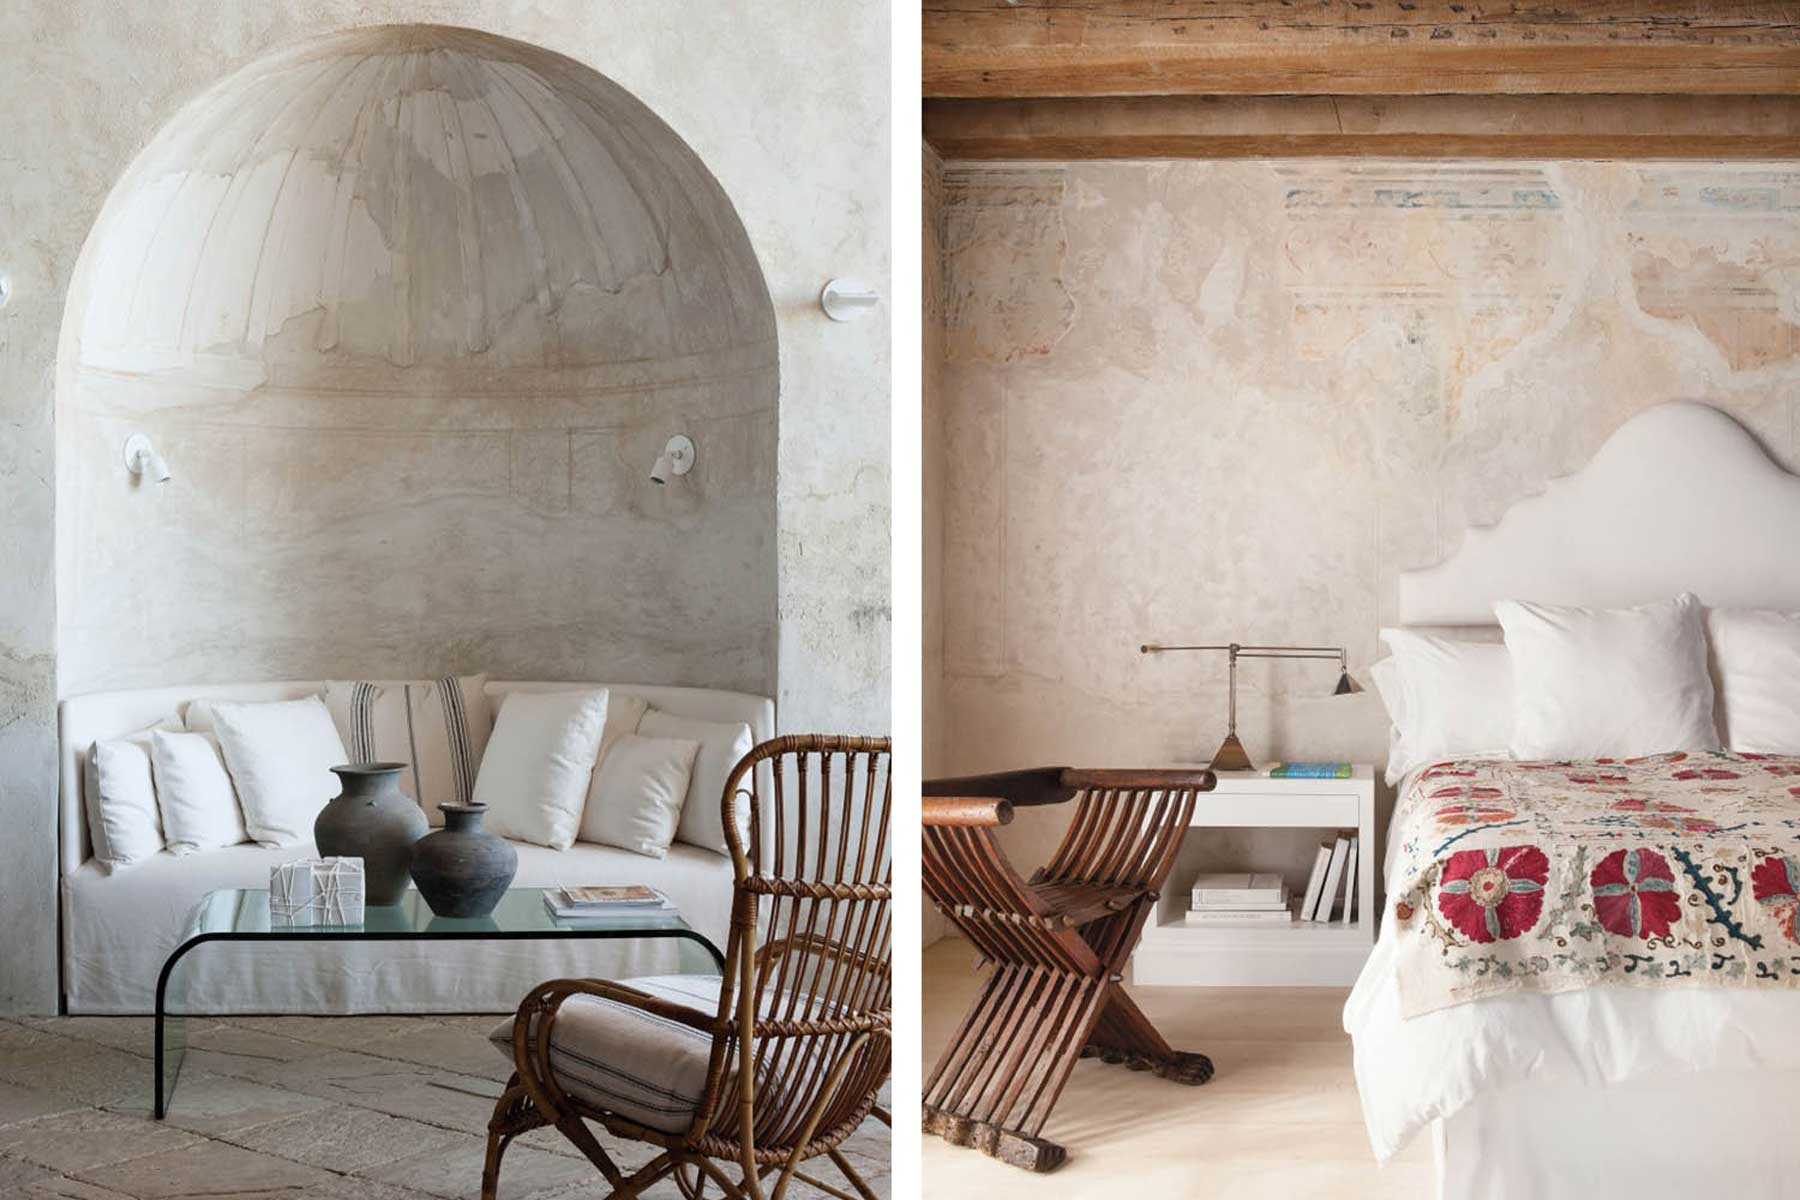 Plaster Stone And Wood In Mediterranean Decor